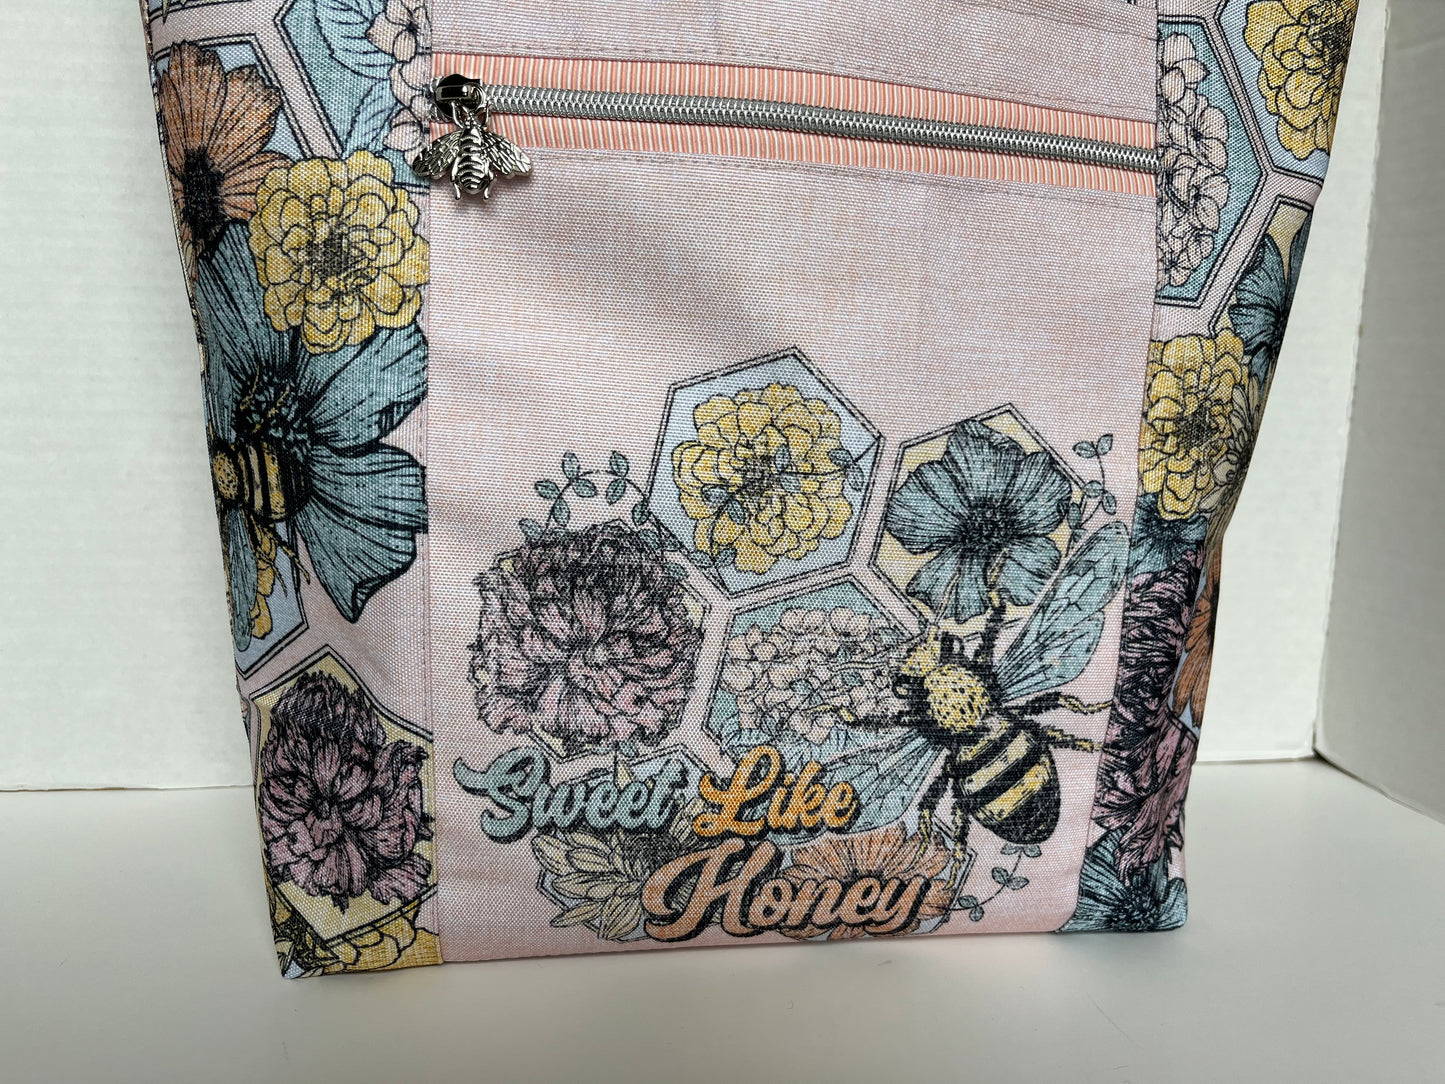 Bee Themed Large Waterproof Tote Bag, Project Bag